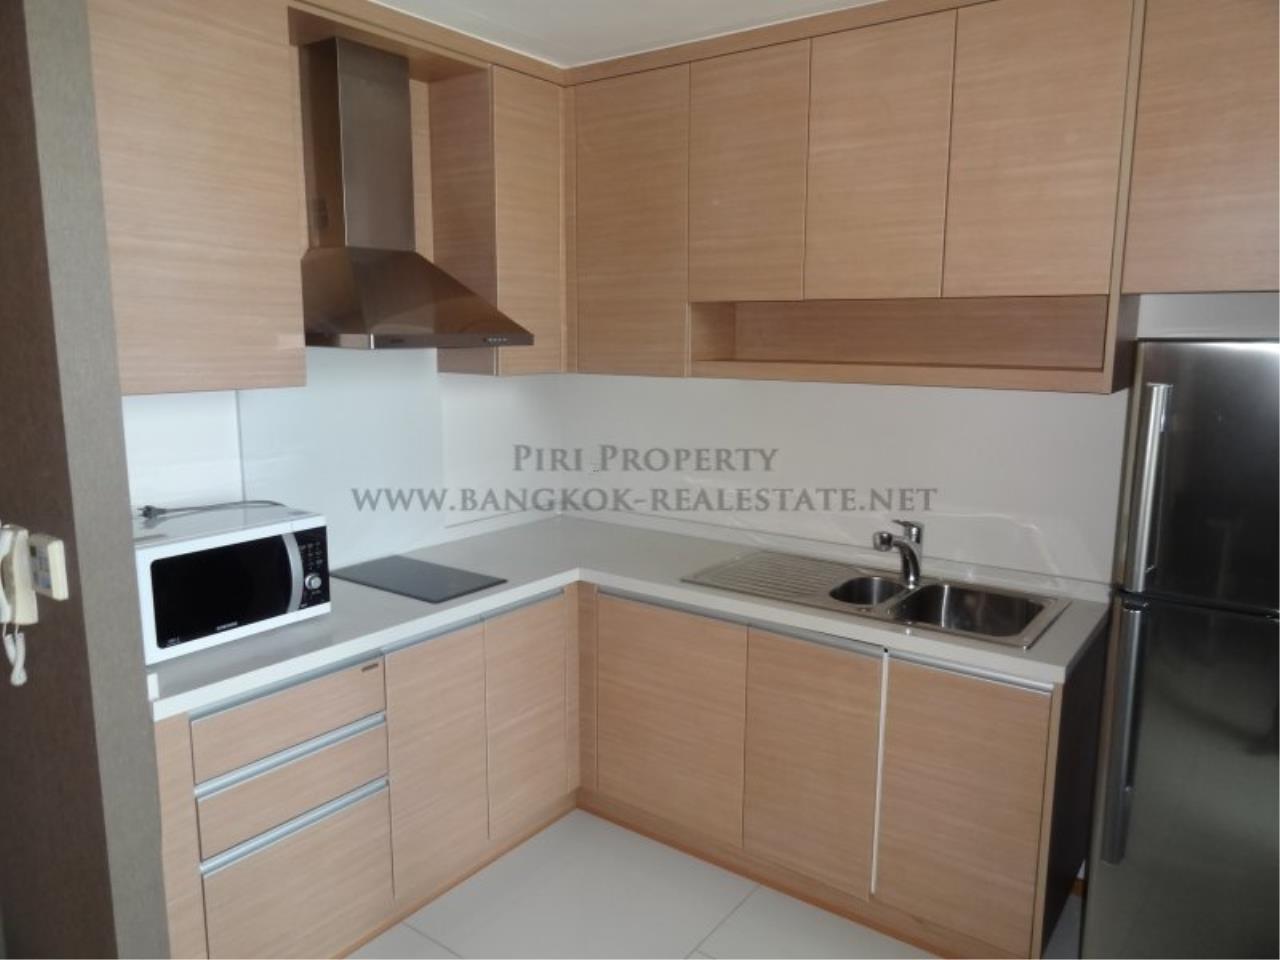 Piri Property Agency's Minimalistic Style - Emporio Duplex Condo for Rent - 1 Bedroom with nice view 5